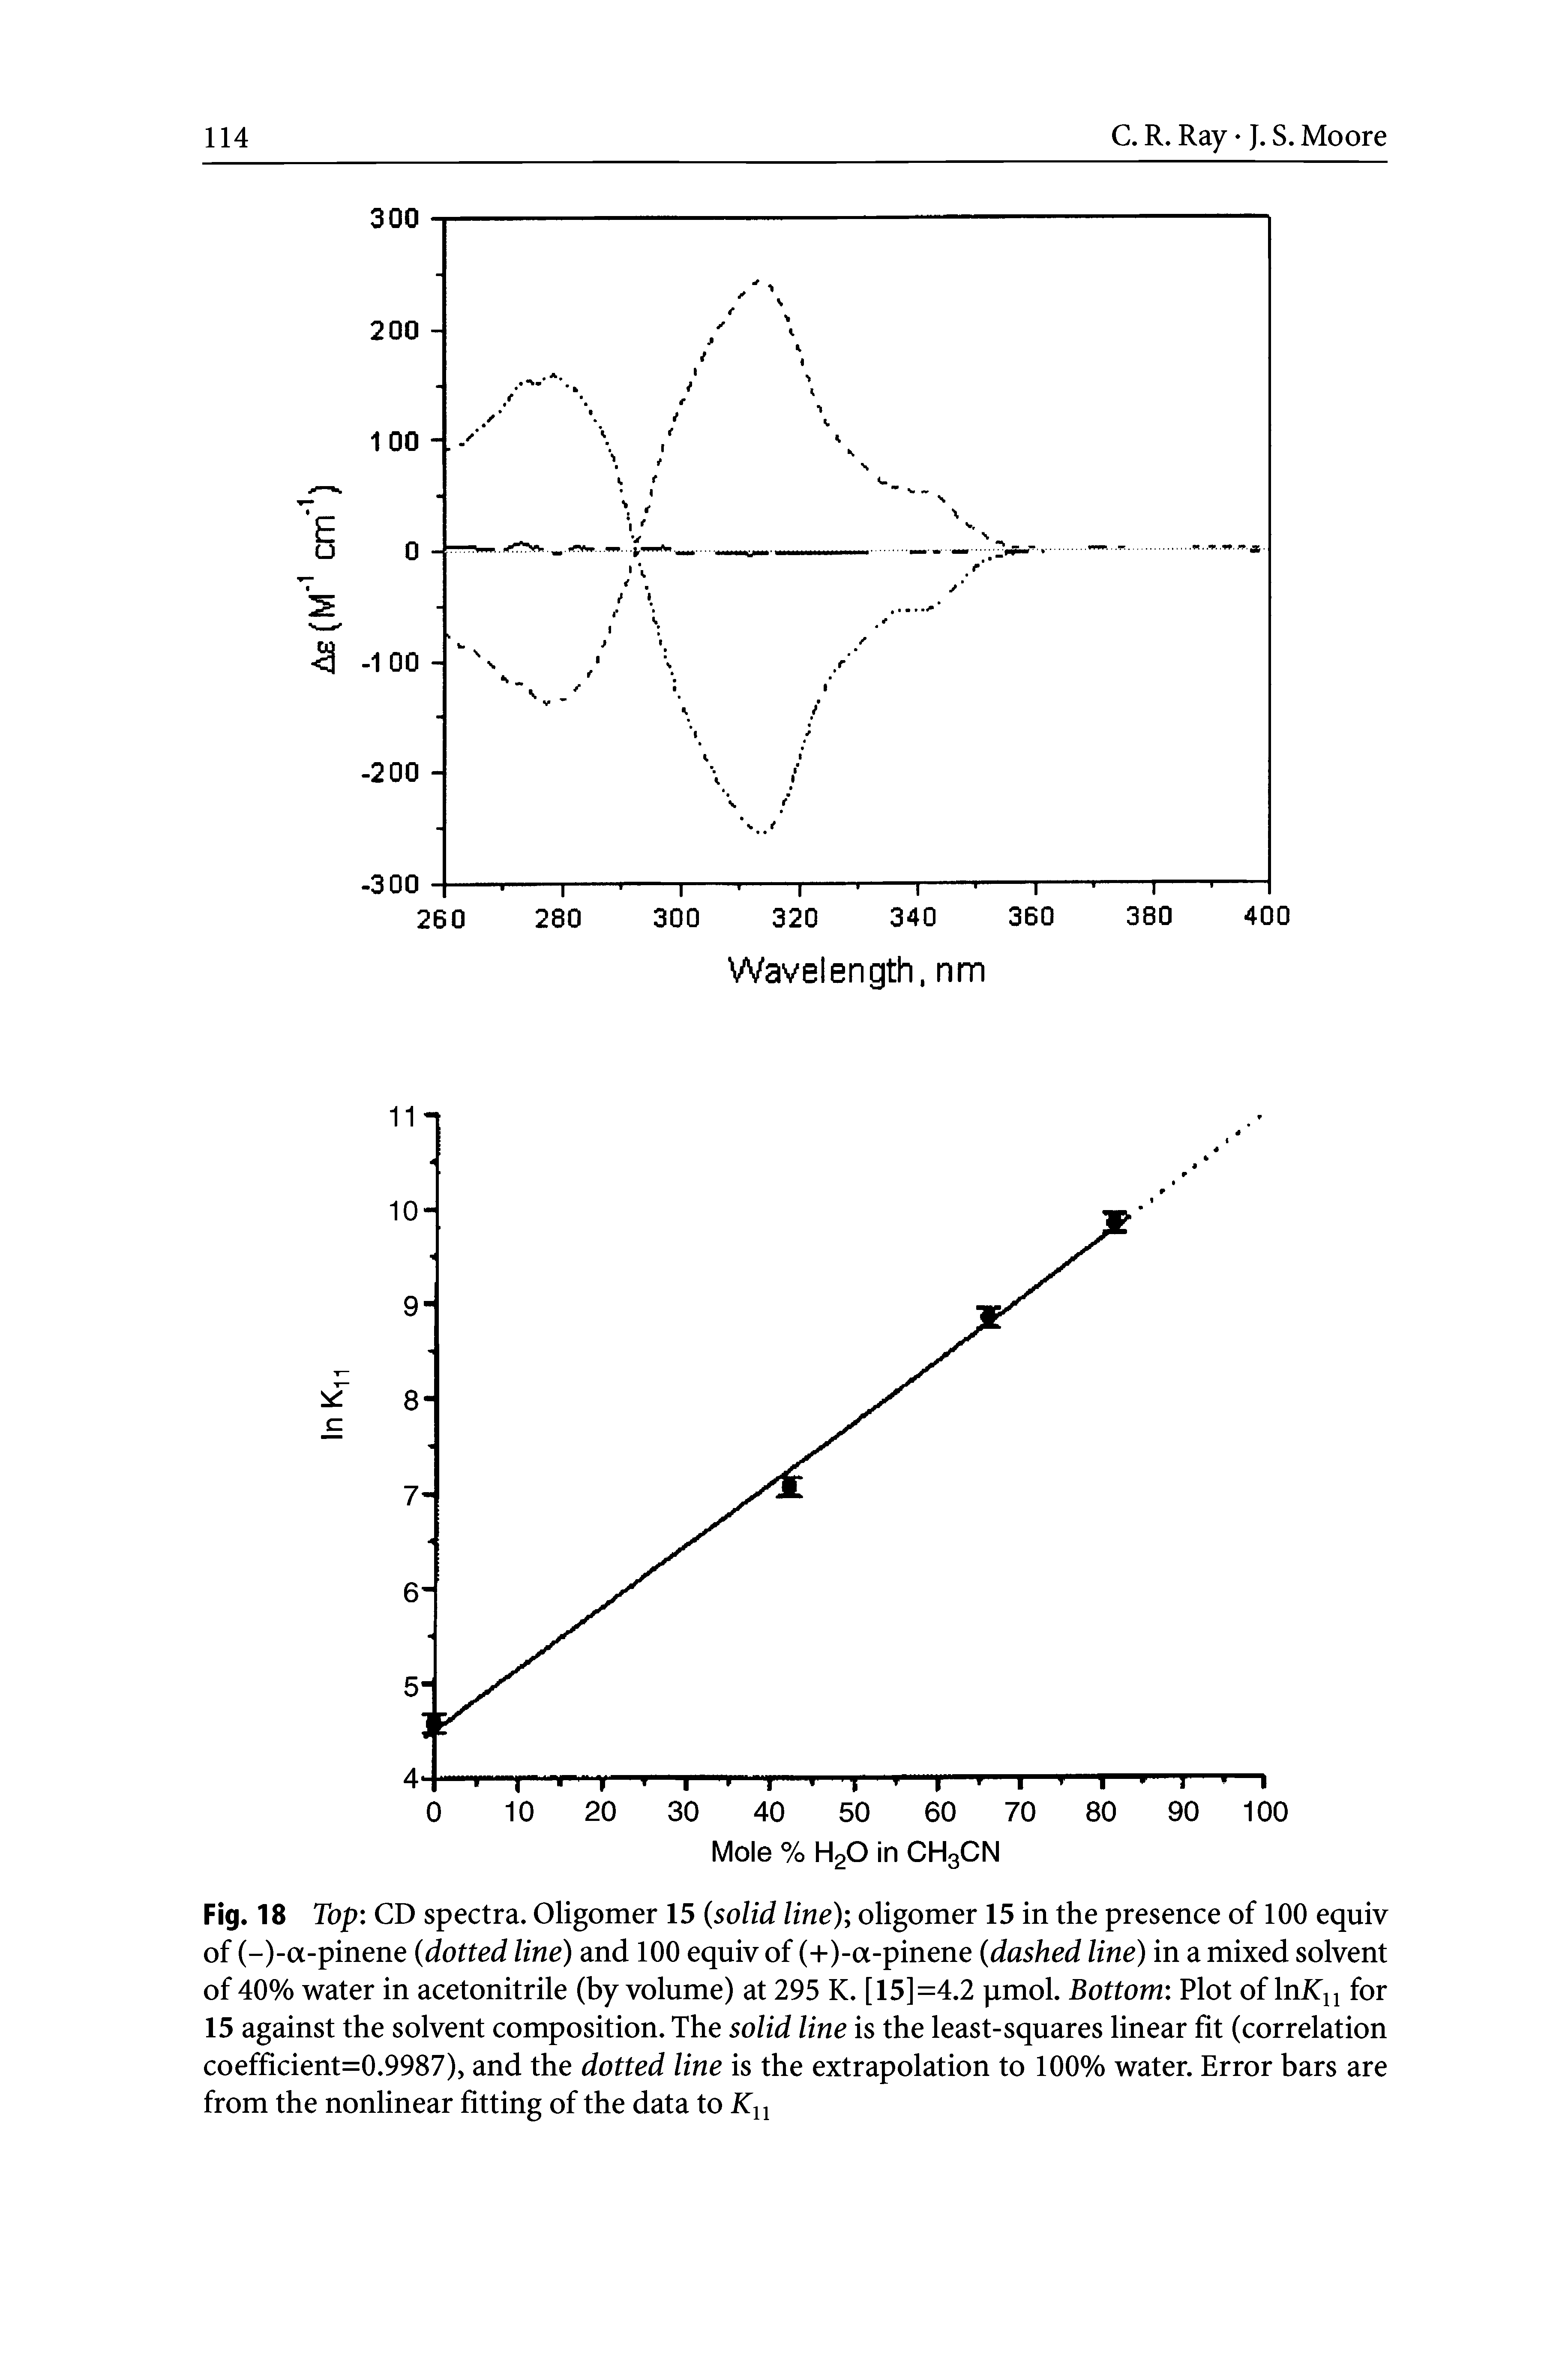 Fig. 18 Top CD spectra. Oligomer 15 (solid line) oligomer 15 in the presence of 100 equiv of (-)-a-pinene (dotted line) and 100 equiv of (+)-a-pinene (dashed line) in a mixed solvent of 40% water in acetonitrile (by volume) at 295 K. [15]=4.2 pmol. Bottom Plot of IniCn for 15 against the solvent composition. The solid line is the least-squares linear fit (correlation coefficient=0.9987), and the dotted line is the extrapolation to 100% water. Error bars are from the nonlinear fitting of the data to...